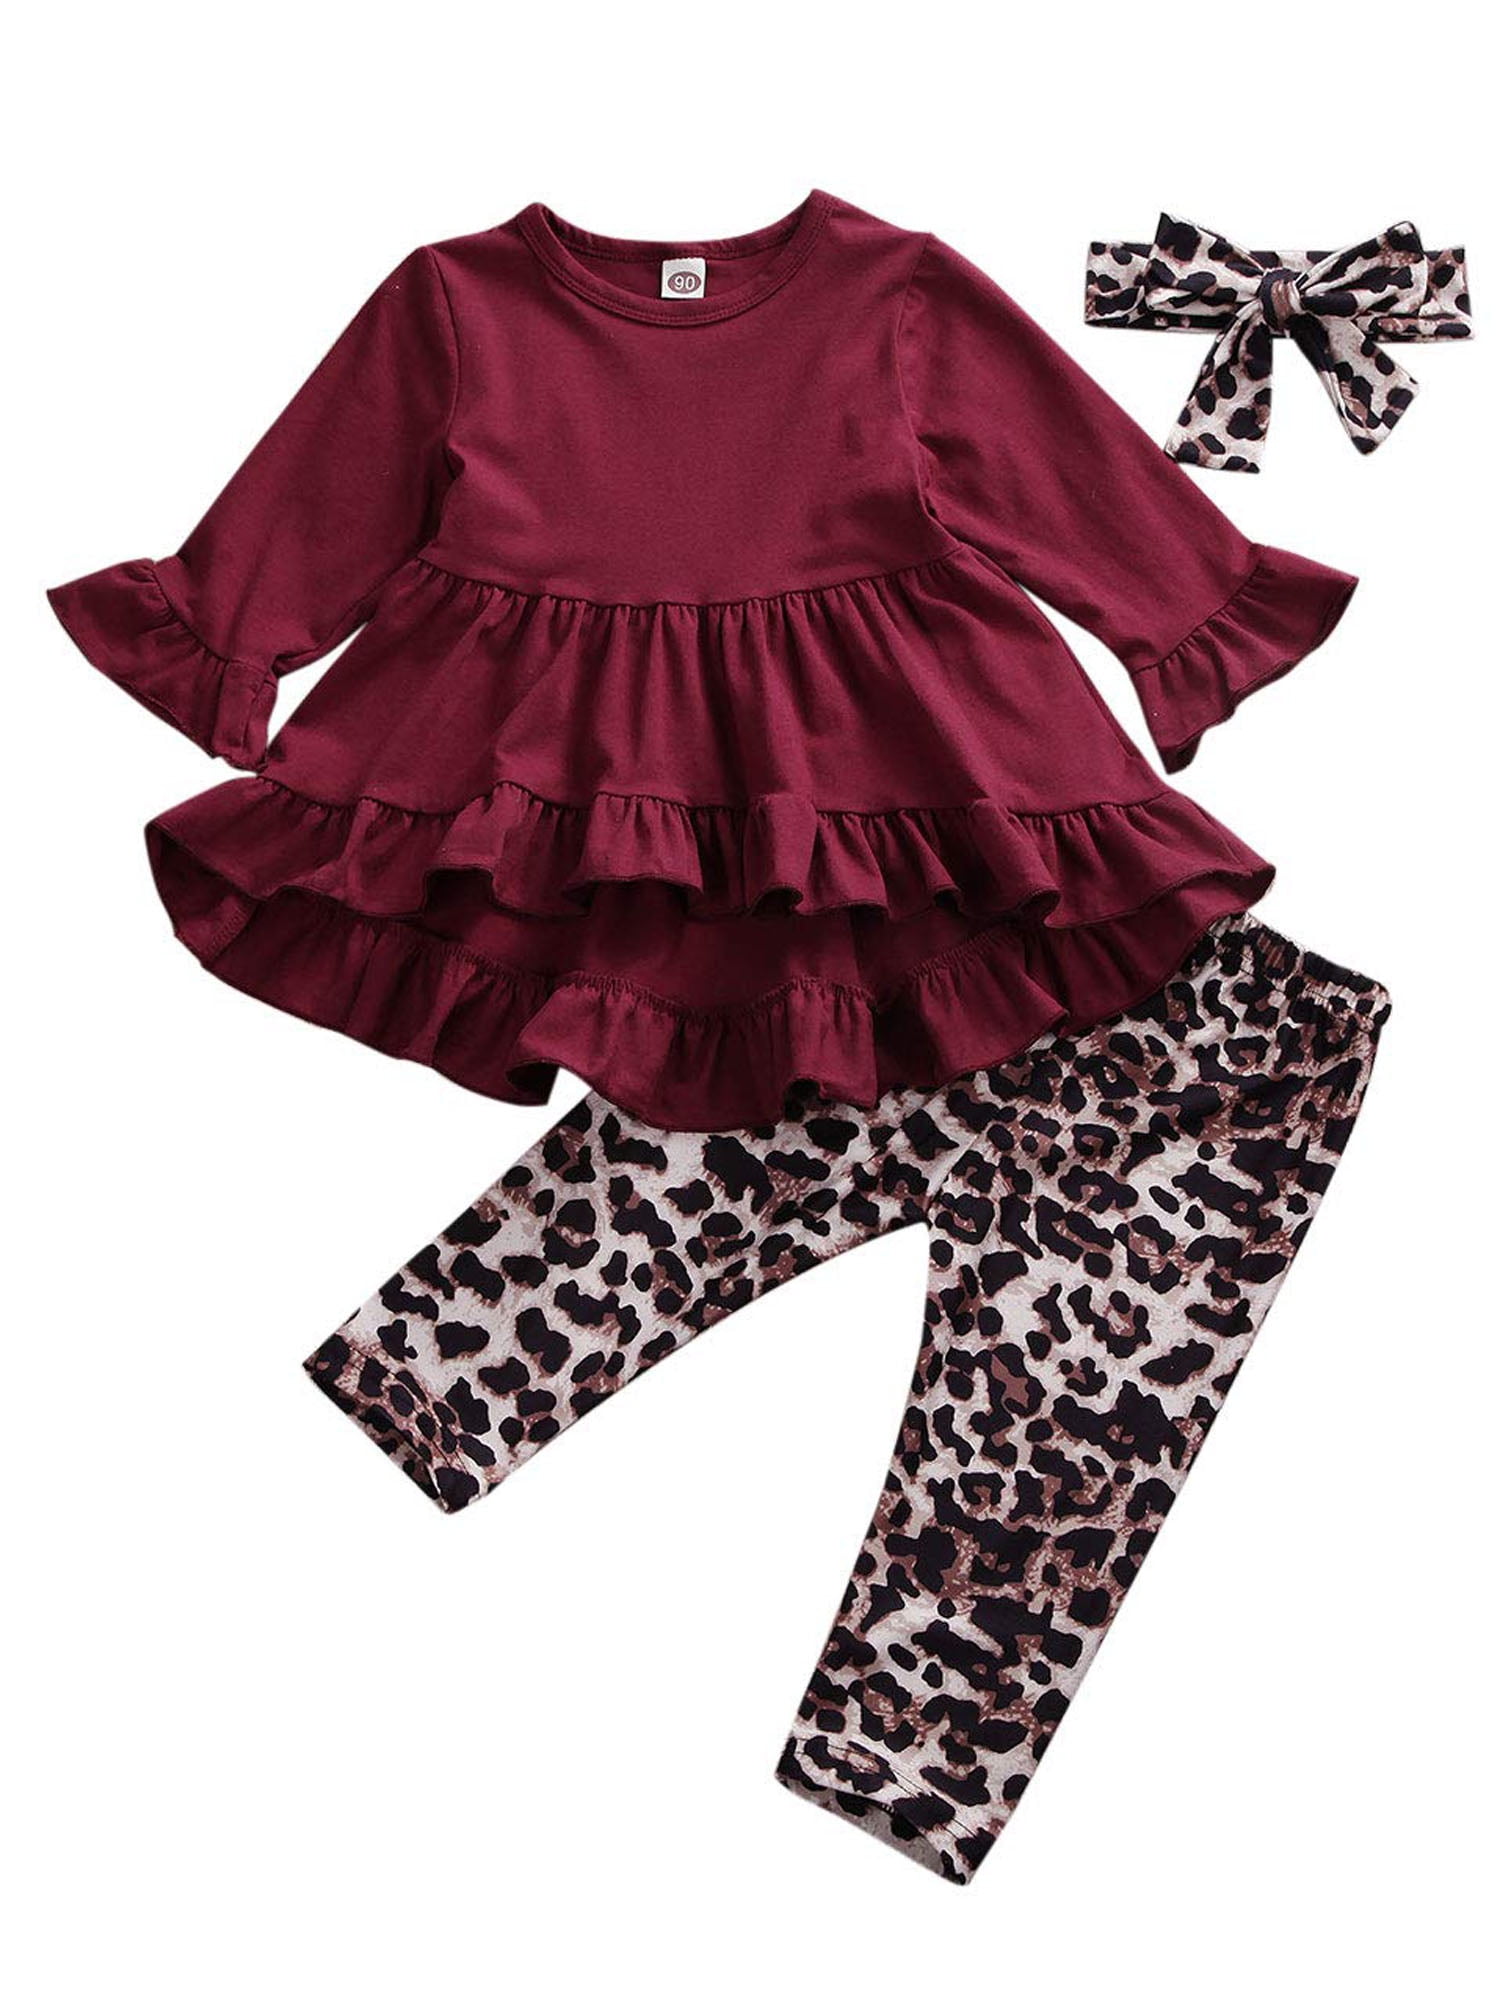 Toddler Baby Girl Clothes Ruffle Tops Dress+Leopard Leggings Pants Outfit Set 